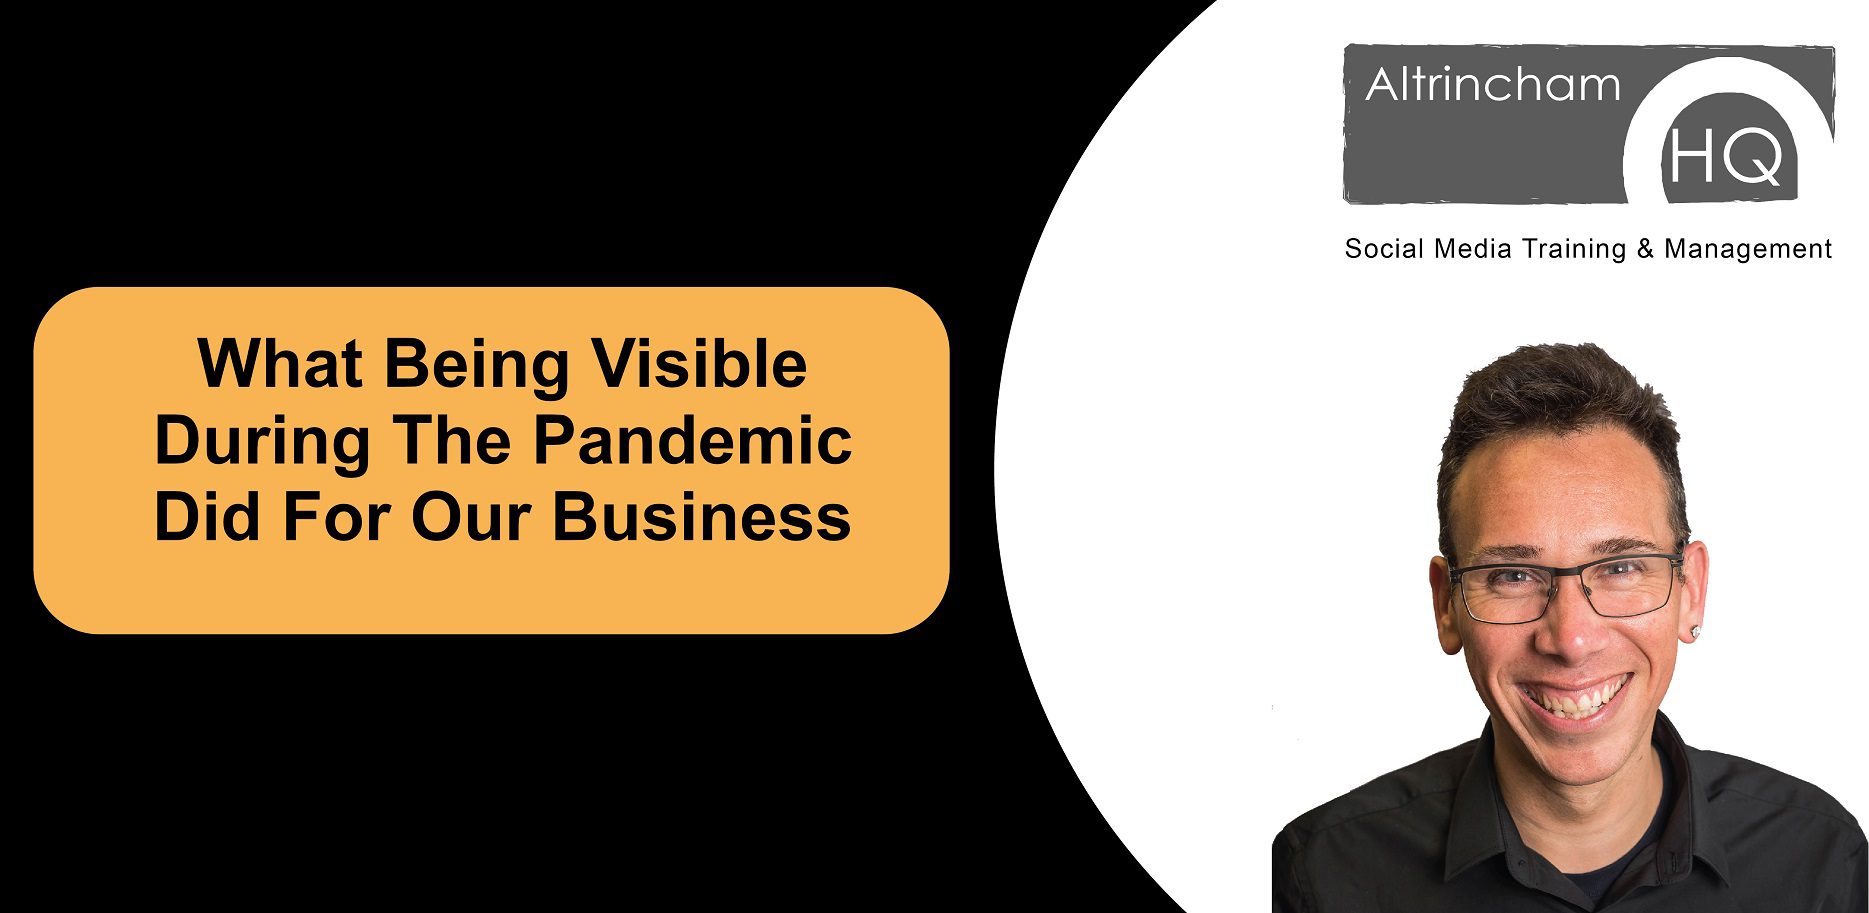 What Being Visible During The Pandemic Did For Our Business